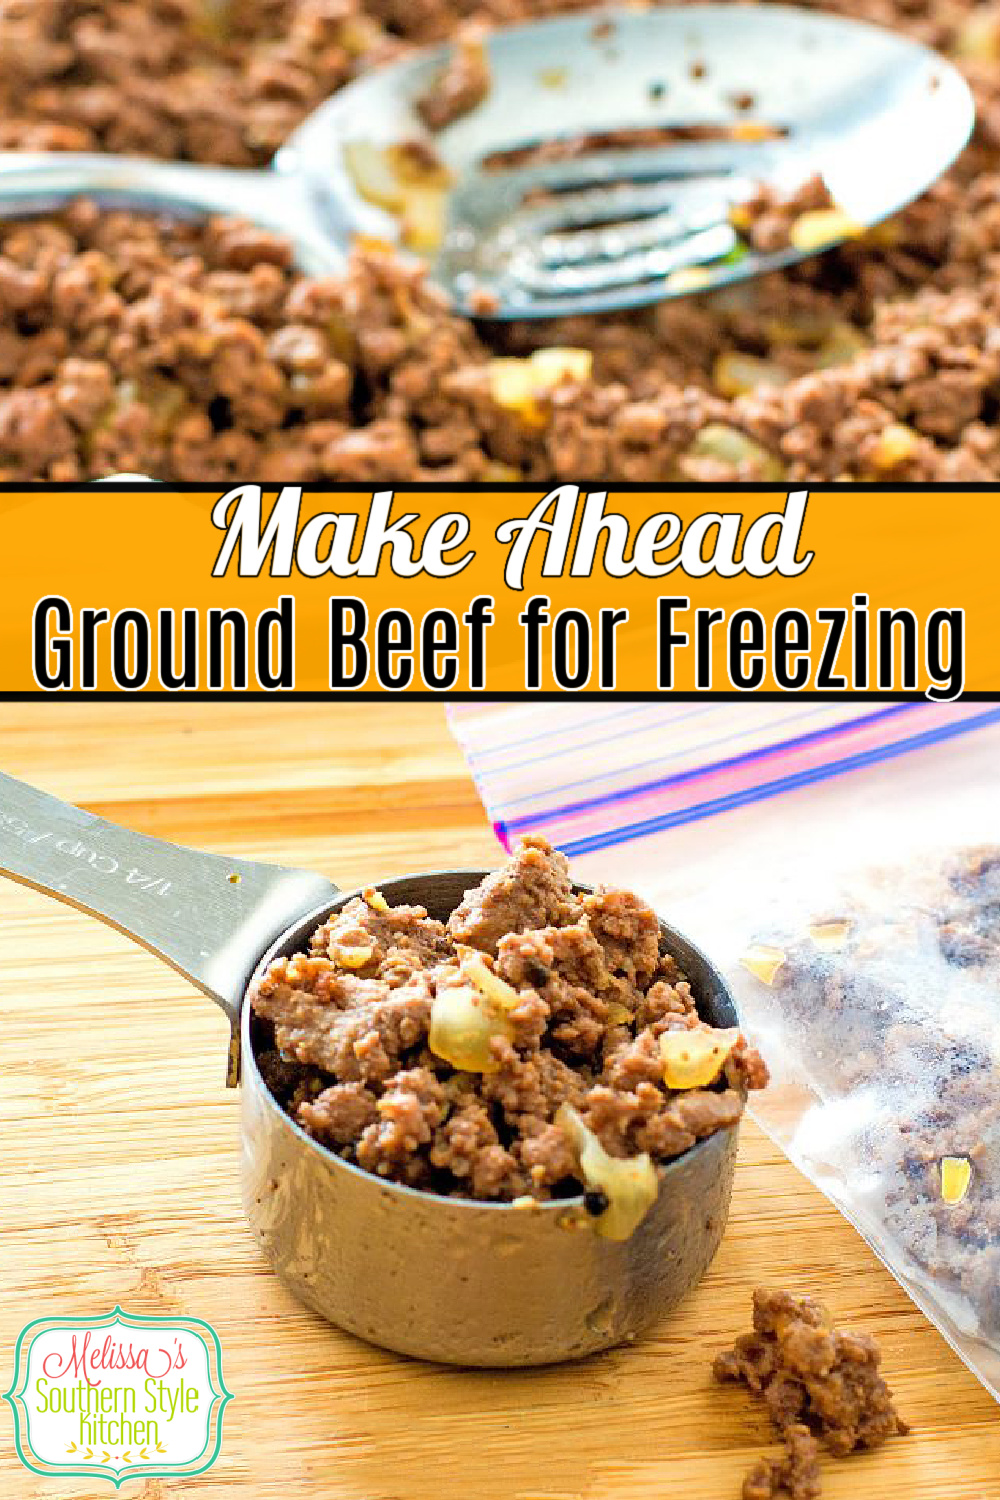 Learn how to Make Ahead Ground Beef for Freezing and have it ready for busy day meals using it for sloppy joes, to tacos and spaghetti. #groundbeef #easygroundbeefrecipes #tacos #sloppyjoes #30minutemeals #dinnerideas #easyrecipes #freezermeals via @melissasssk